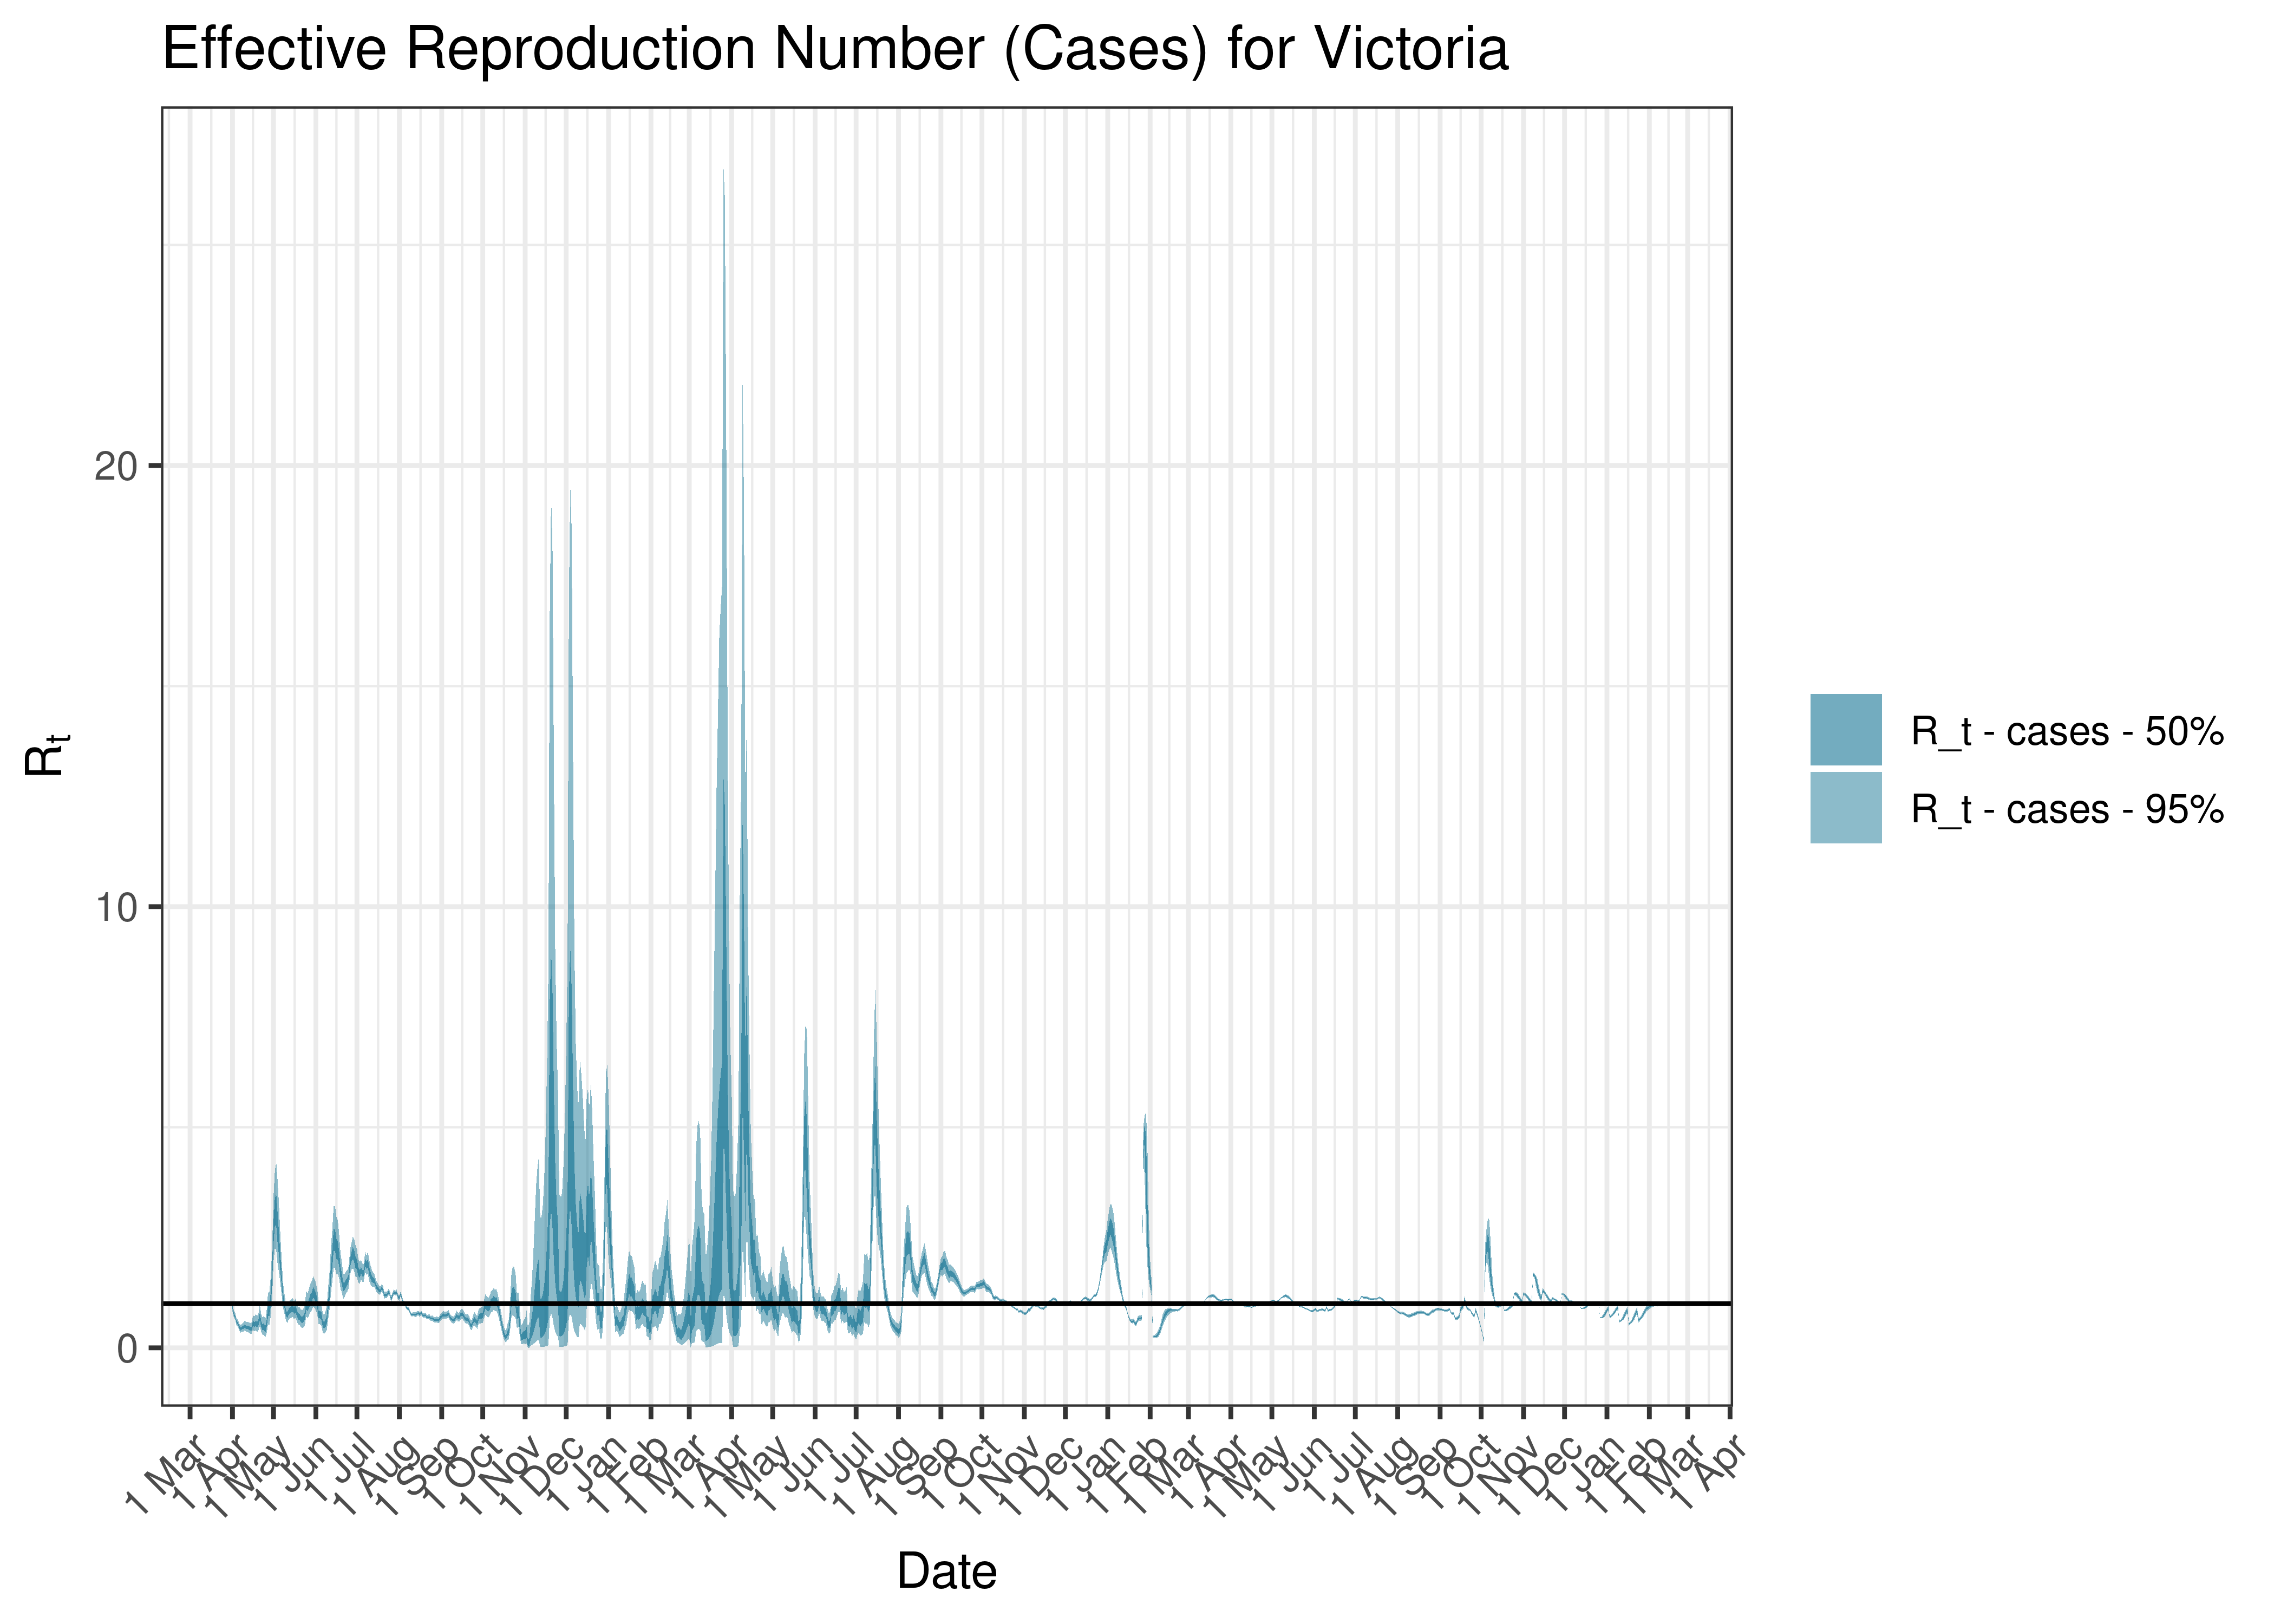 Estimated Effective Reproduction Number Based on Cases for Victoria since 1 April 2020